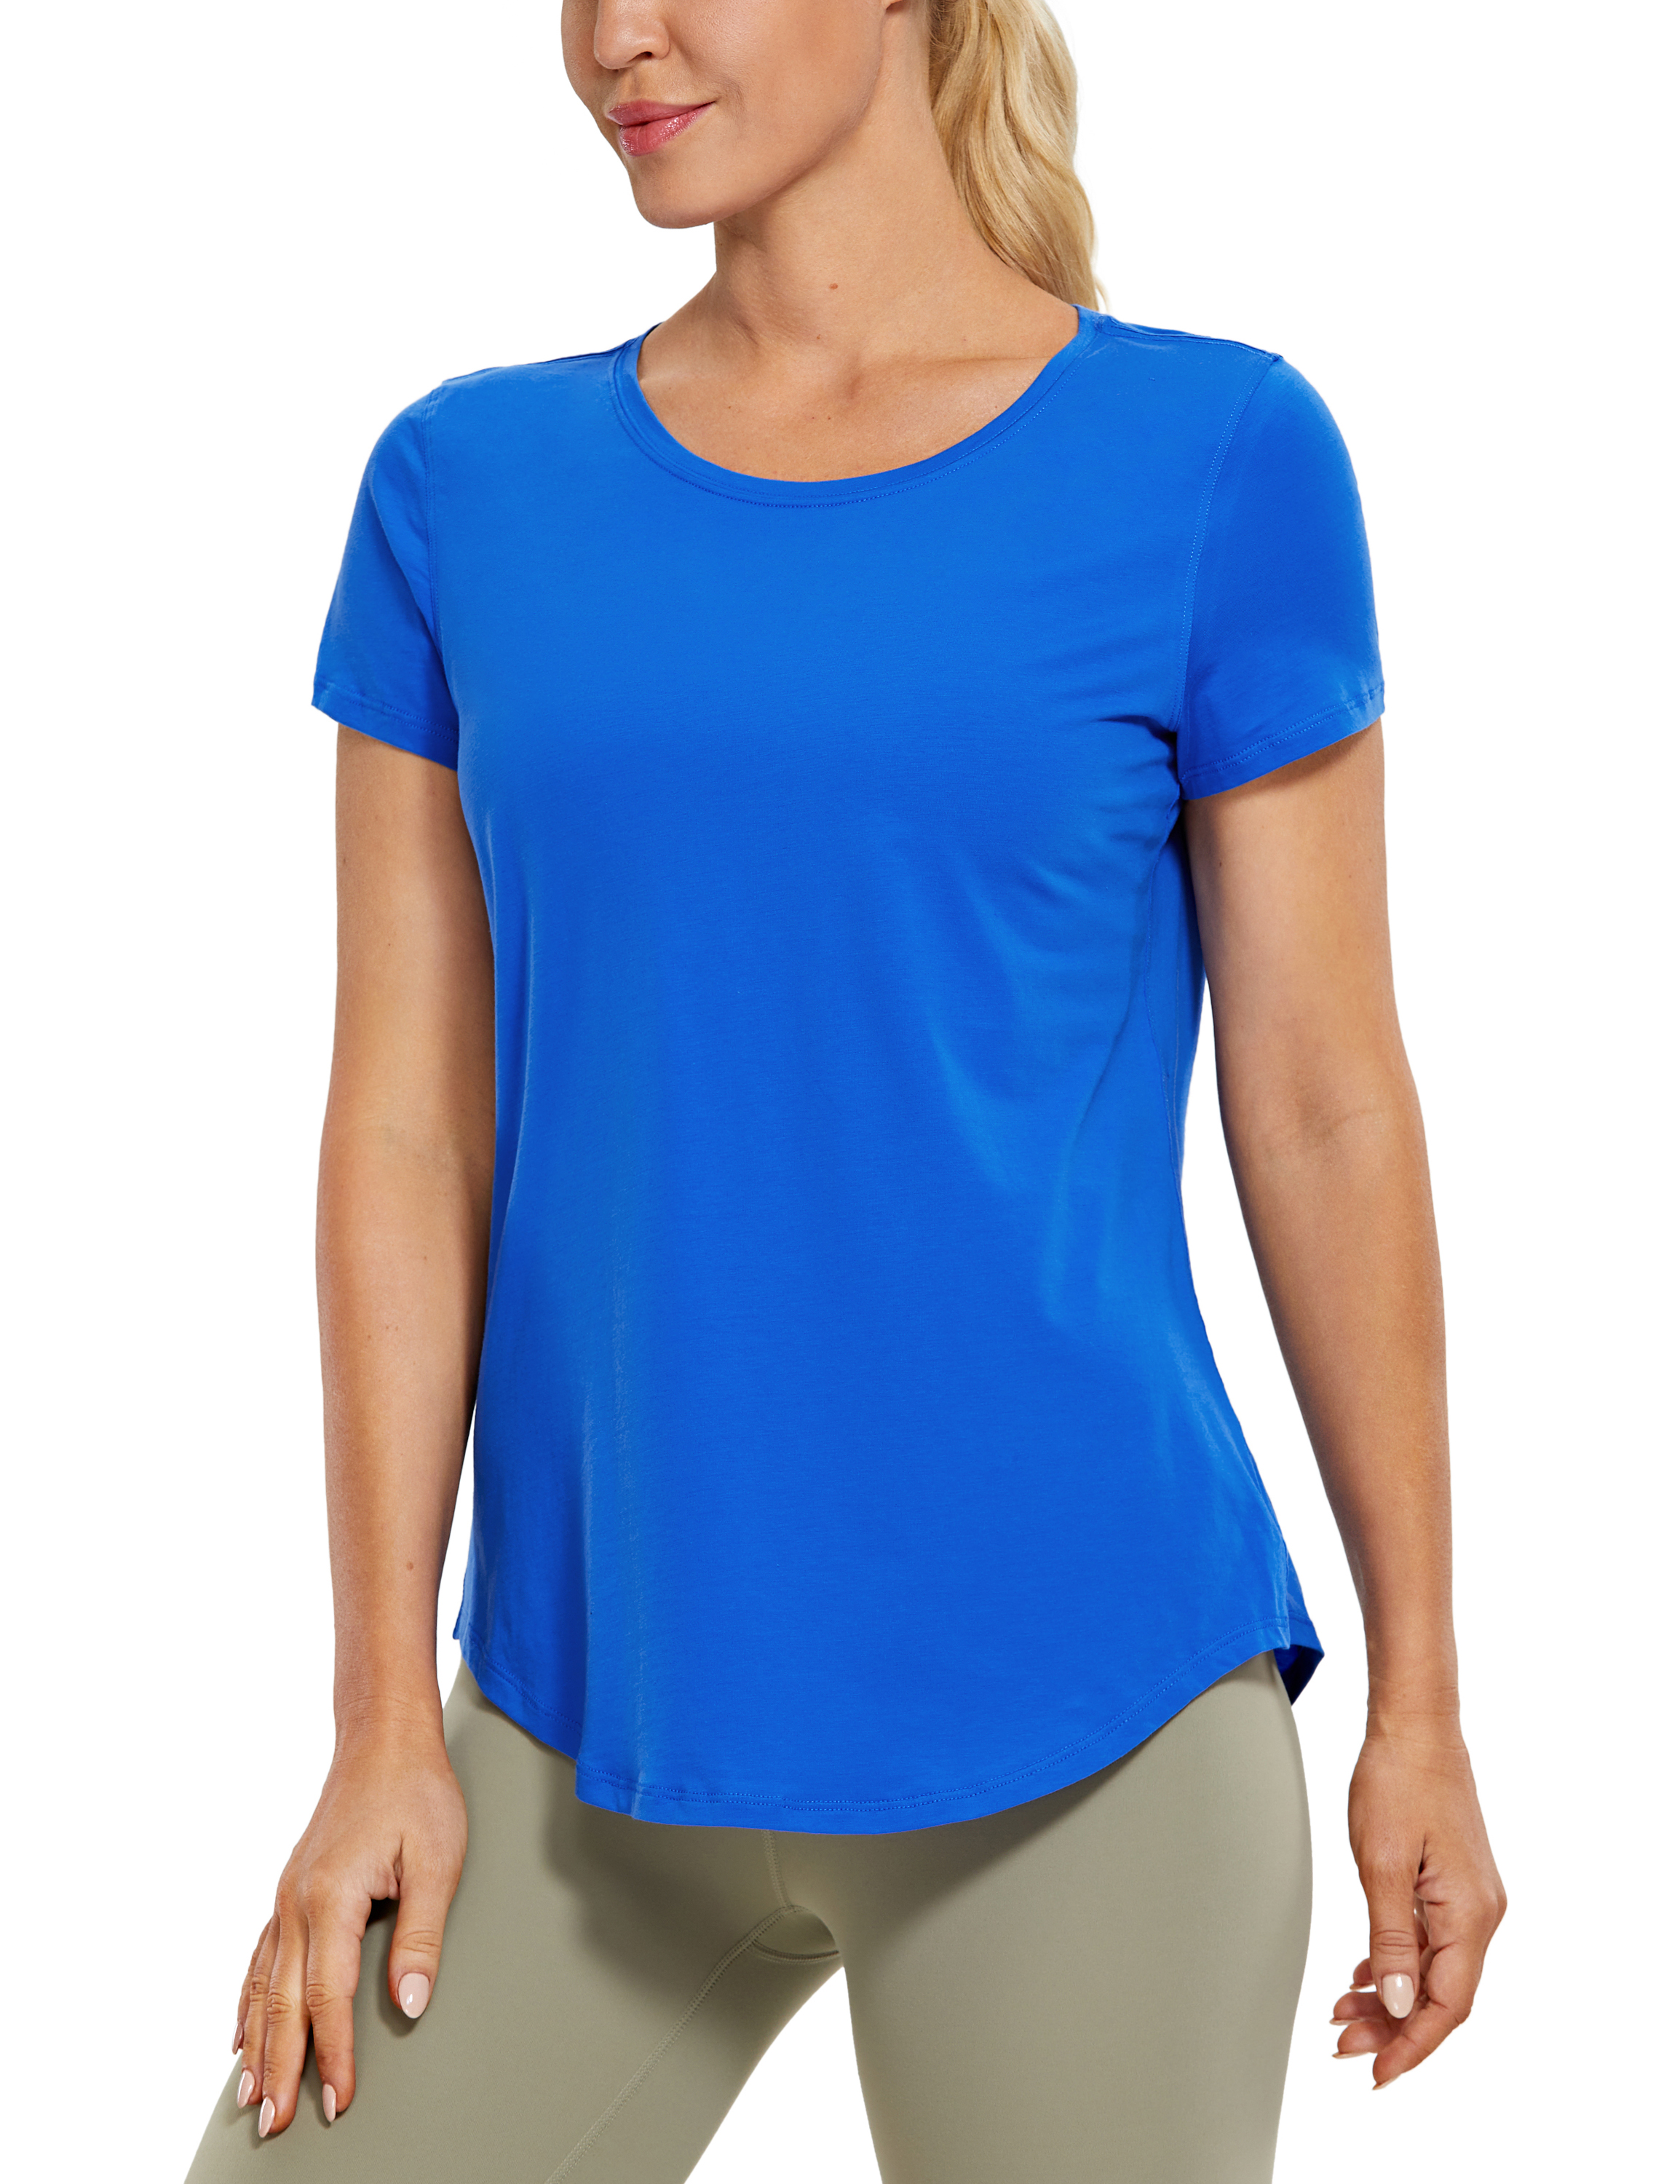 CRZ YOGA Womens Short Sleeve Tops Lightweight Breathable Workout